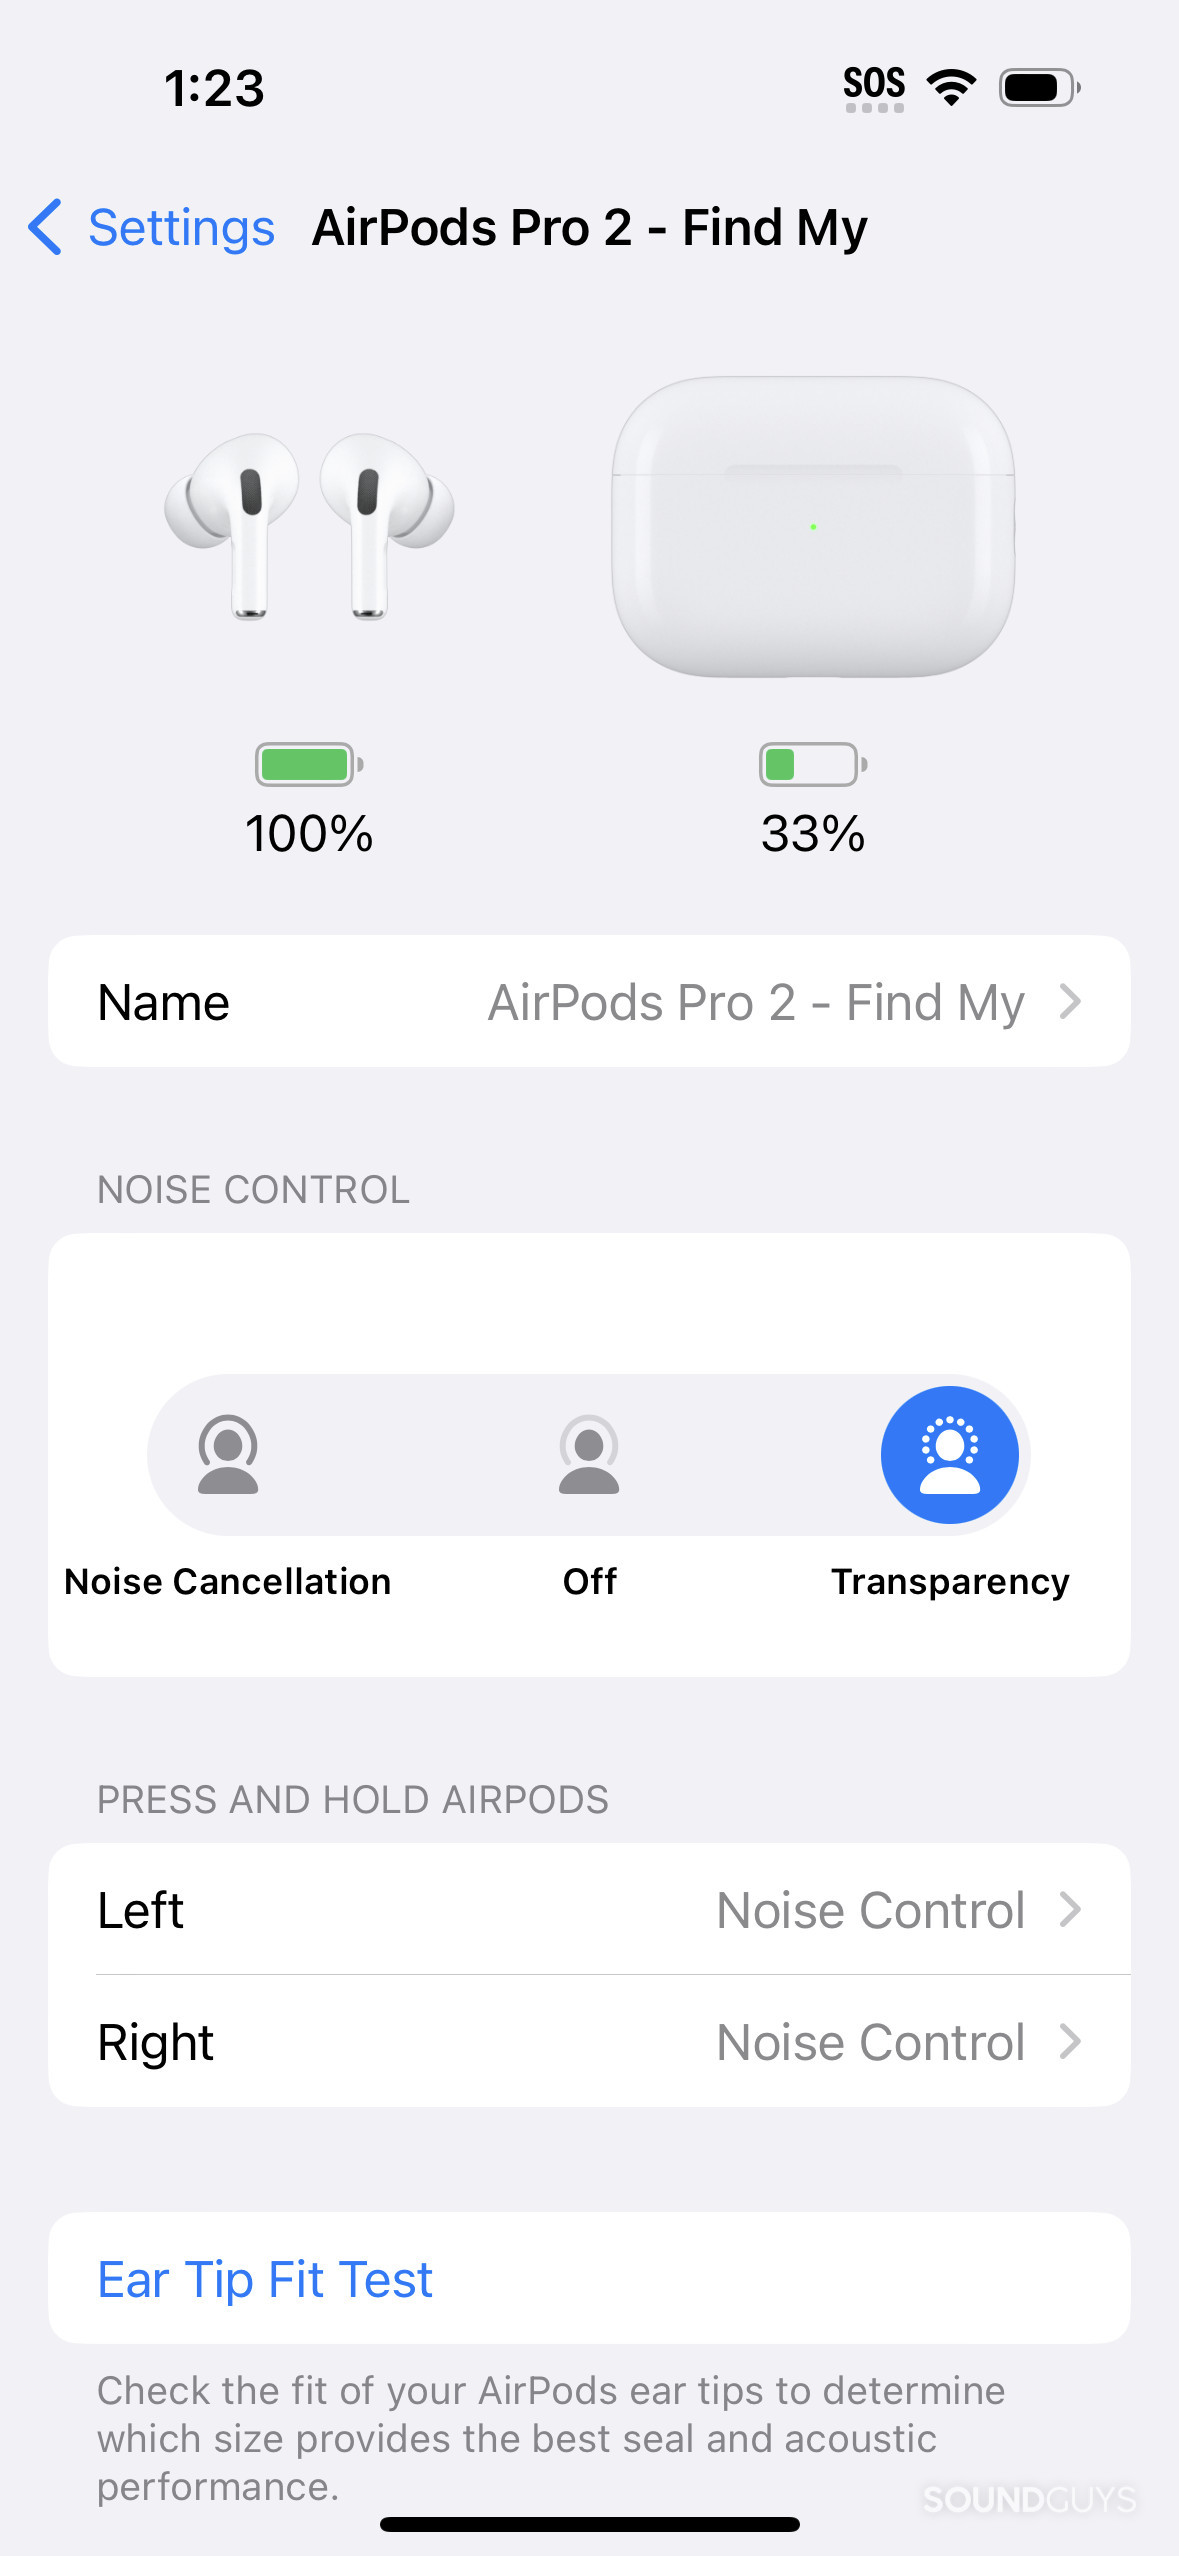 AirPods settings in the iOS settings app, showing noise control options.